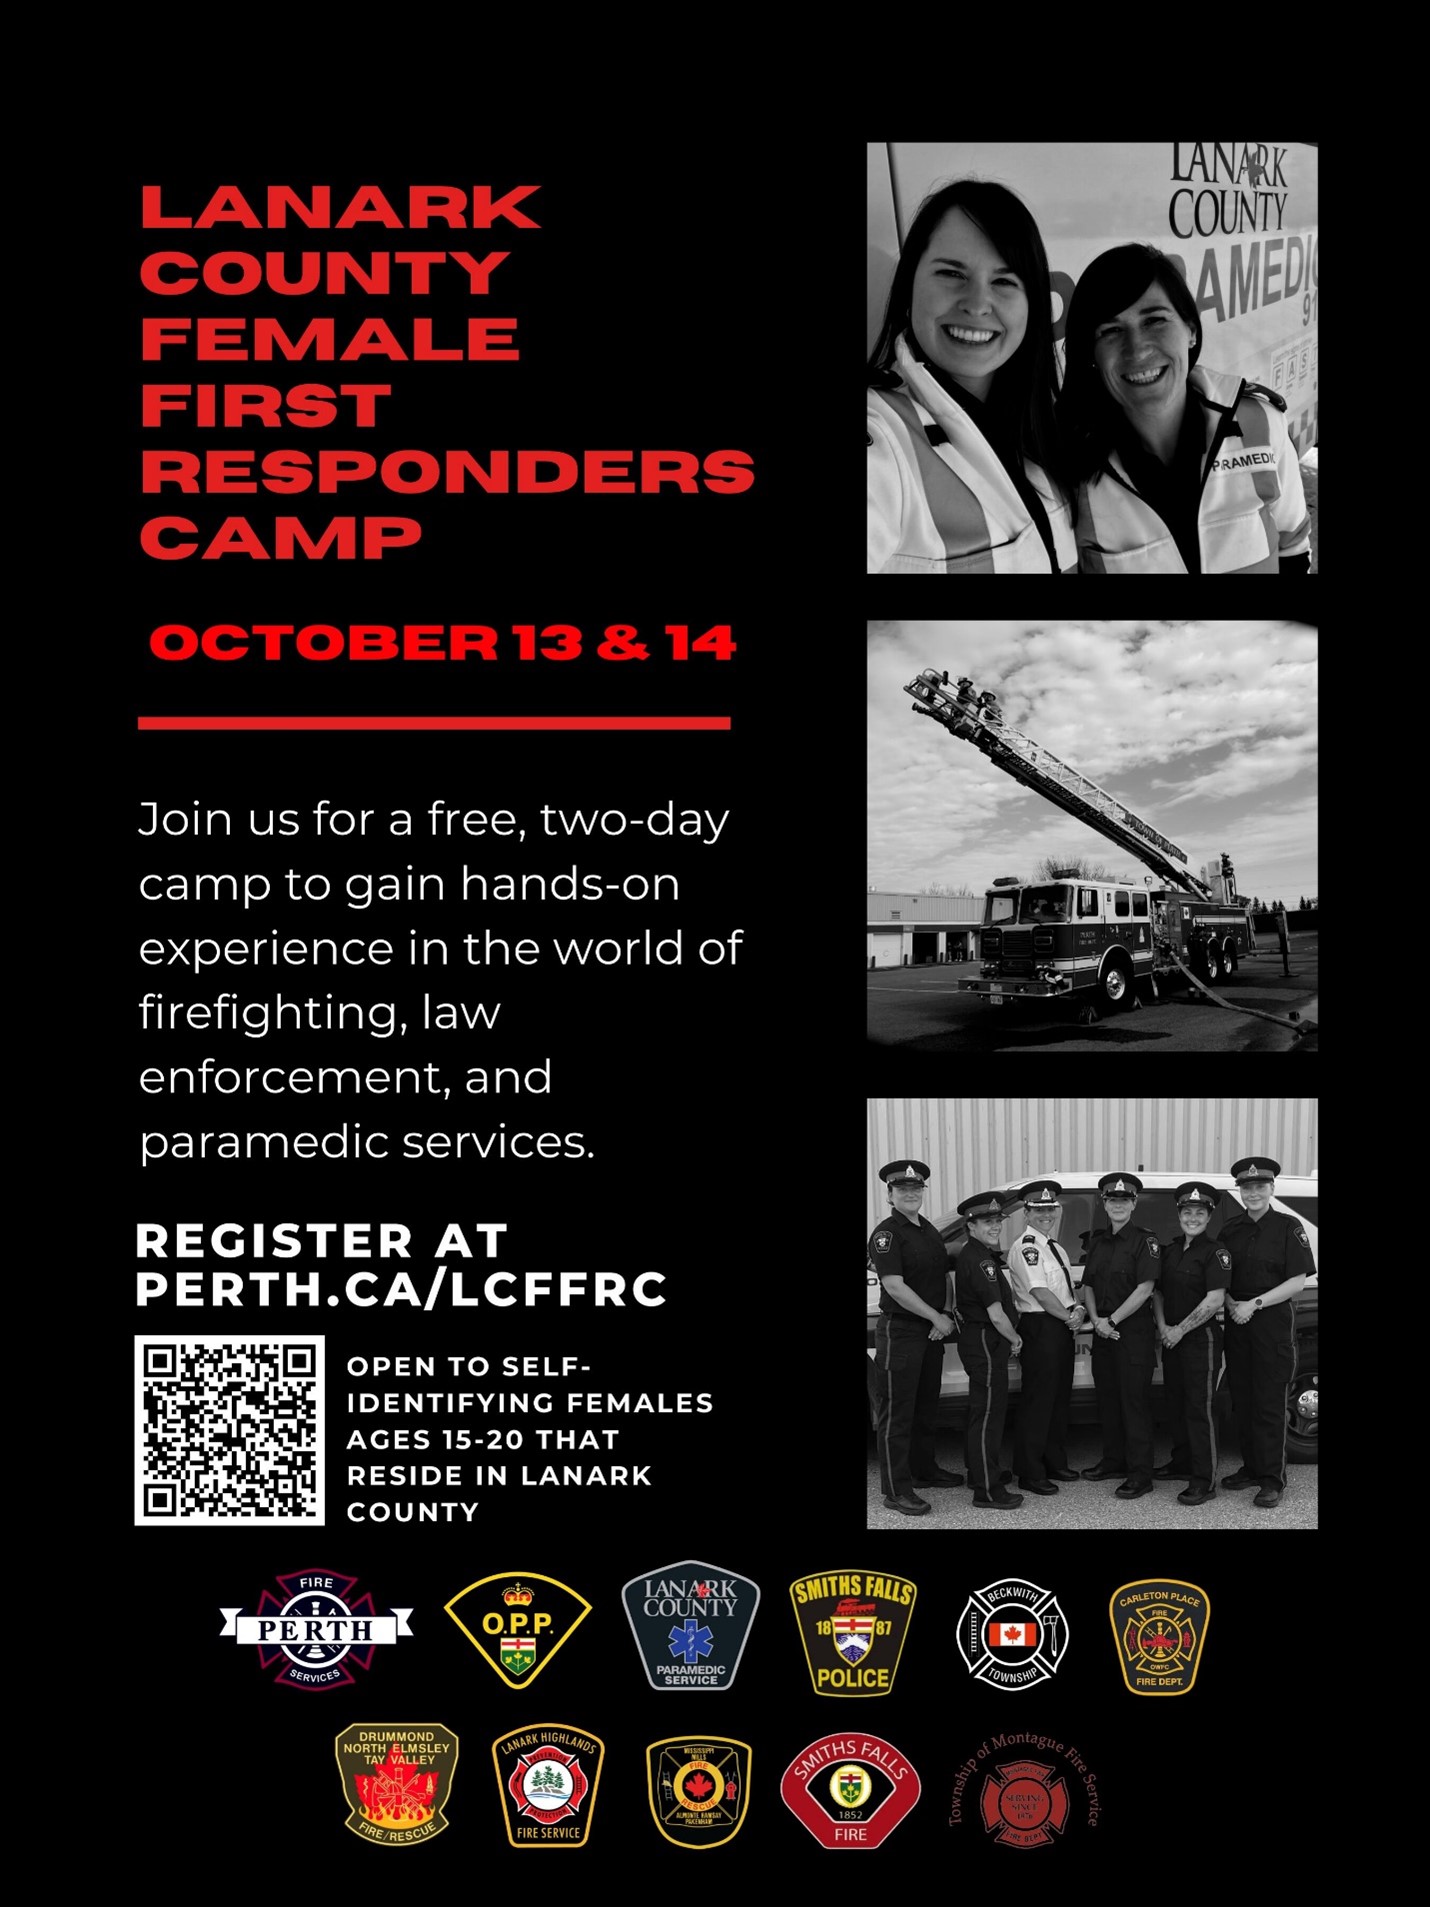 Lanark County Female First Responders Camp poster